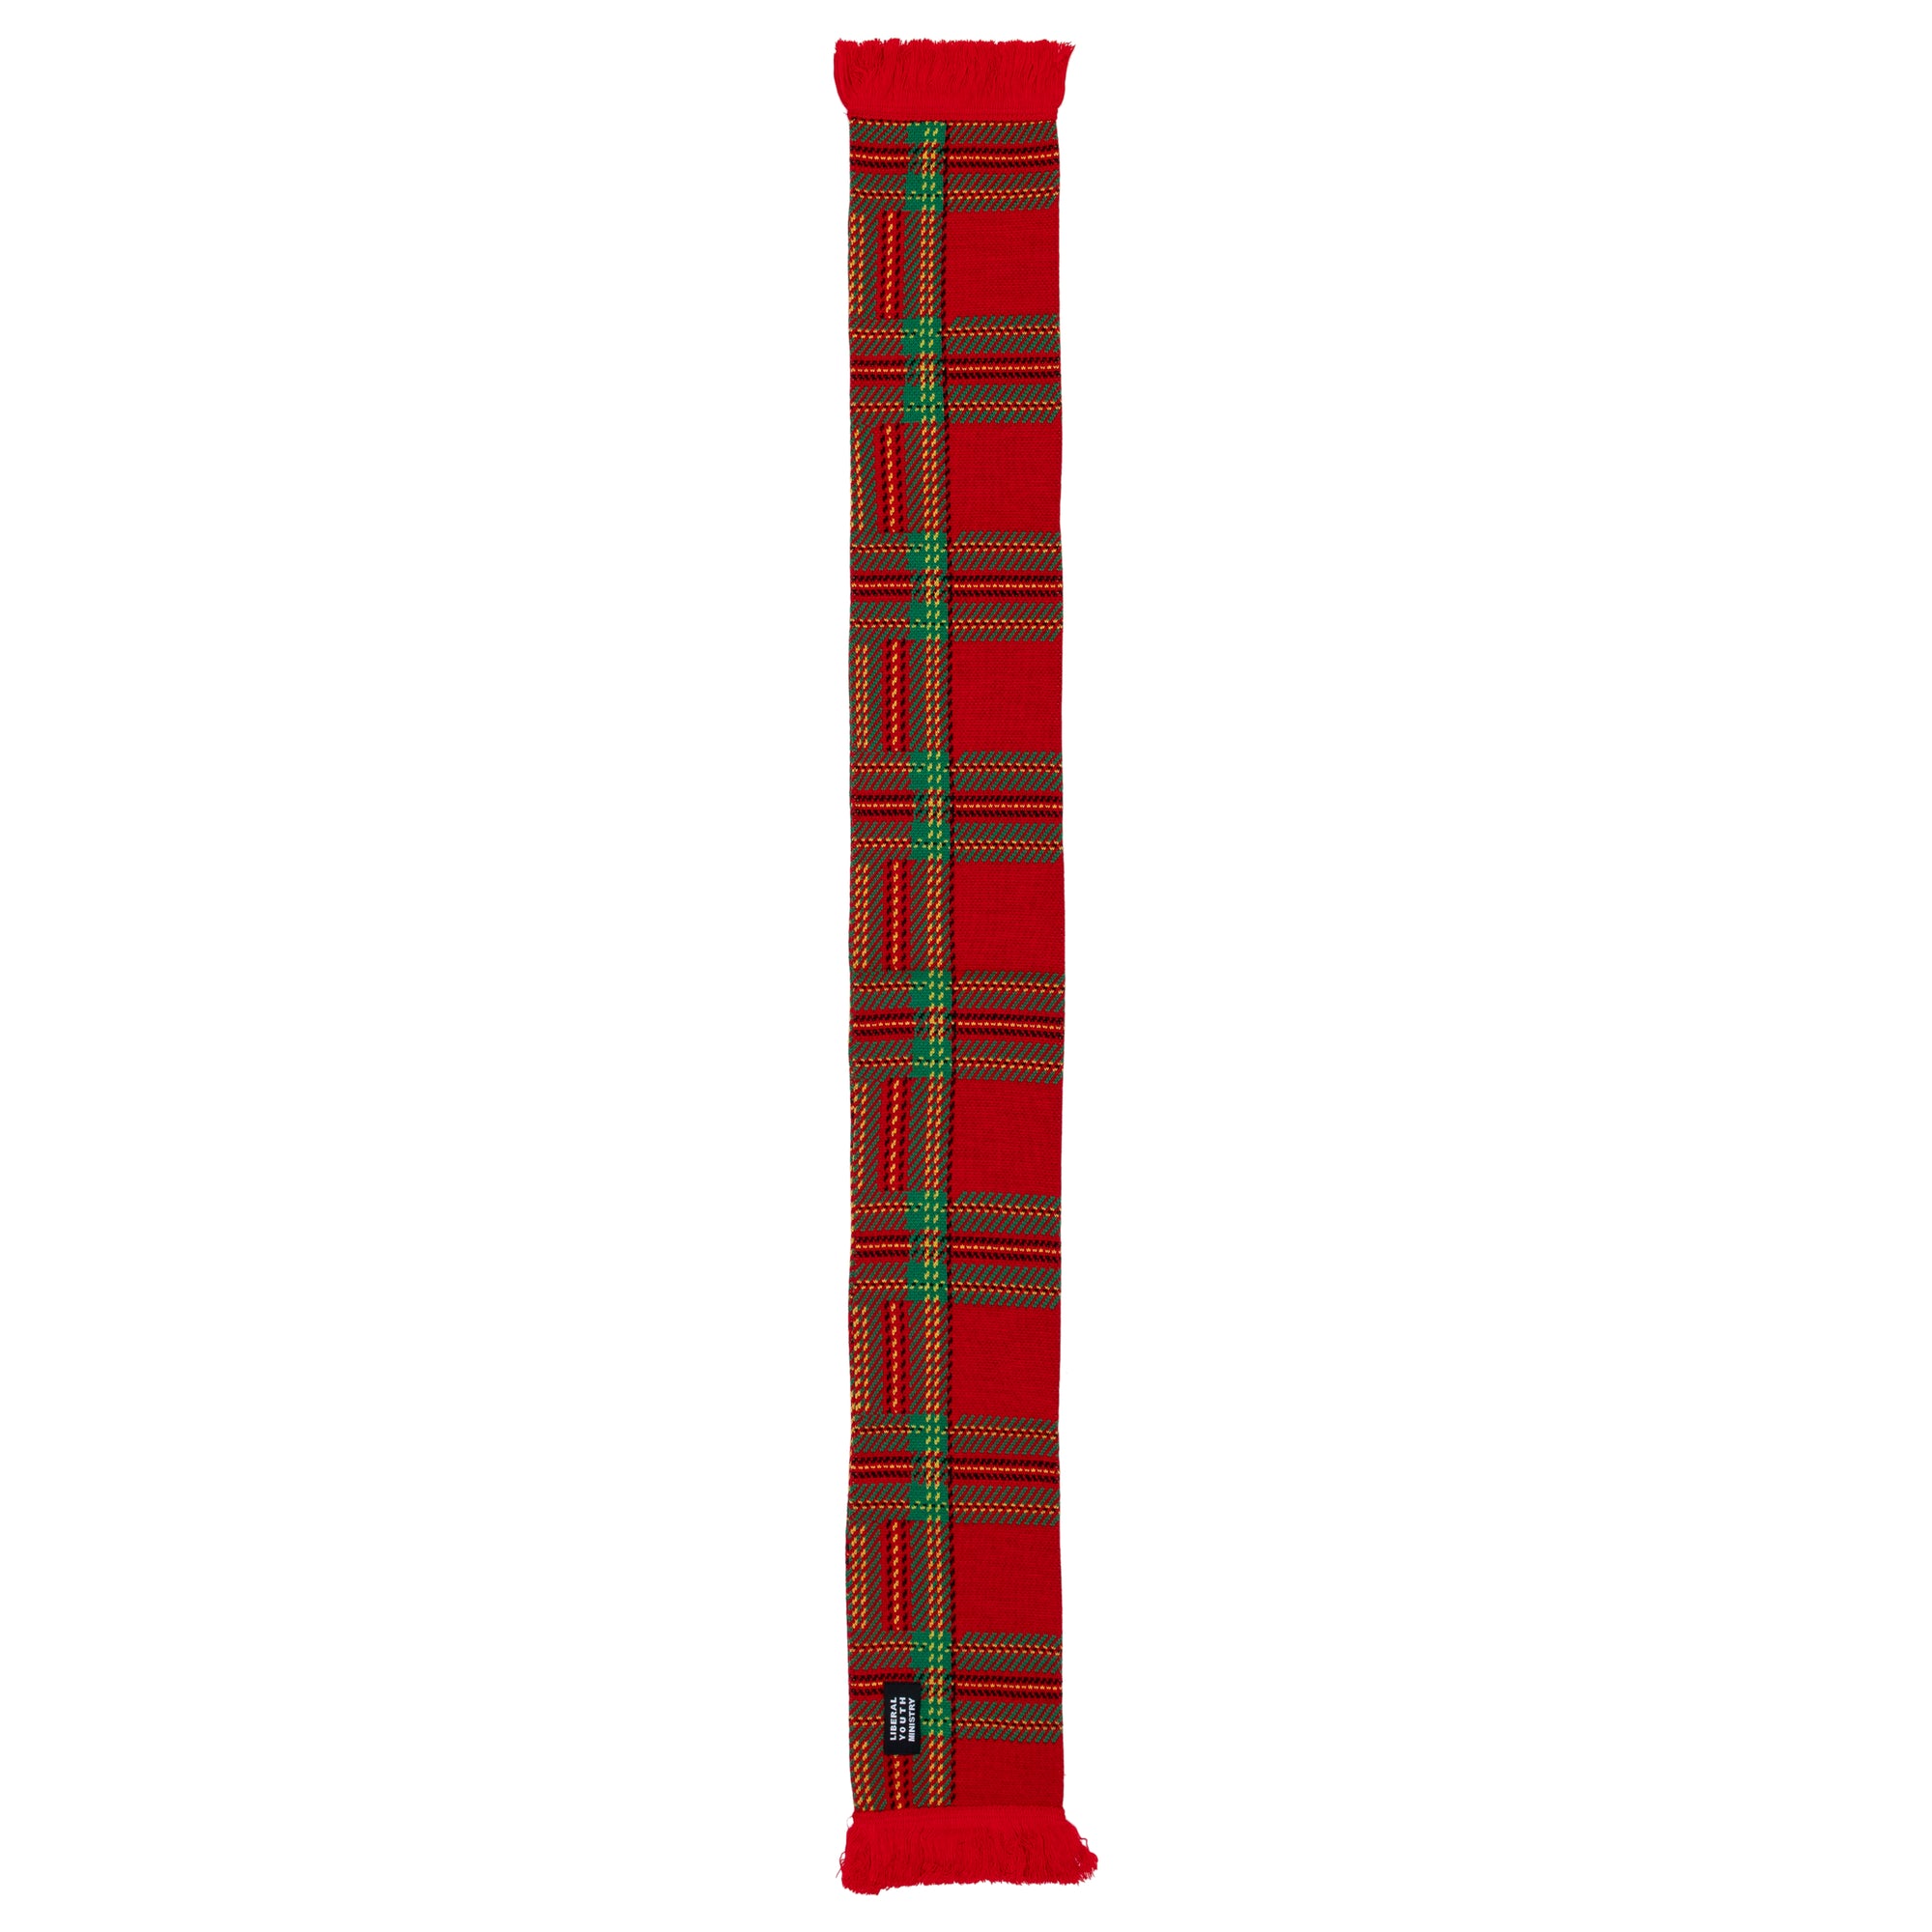 LIBERAL YOUTH MINISTRY - Men Tartan Scarf Escudo Embroidery - Knit - (Red) view 1